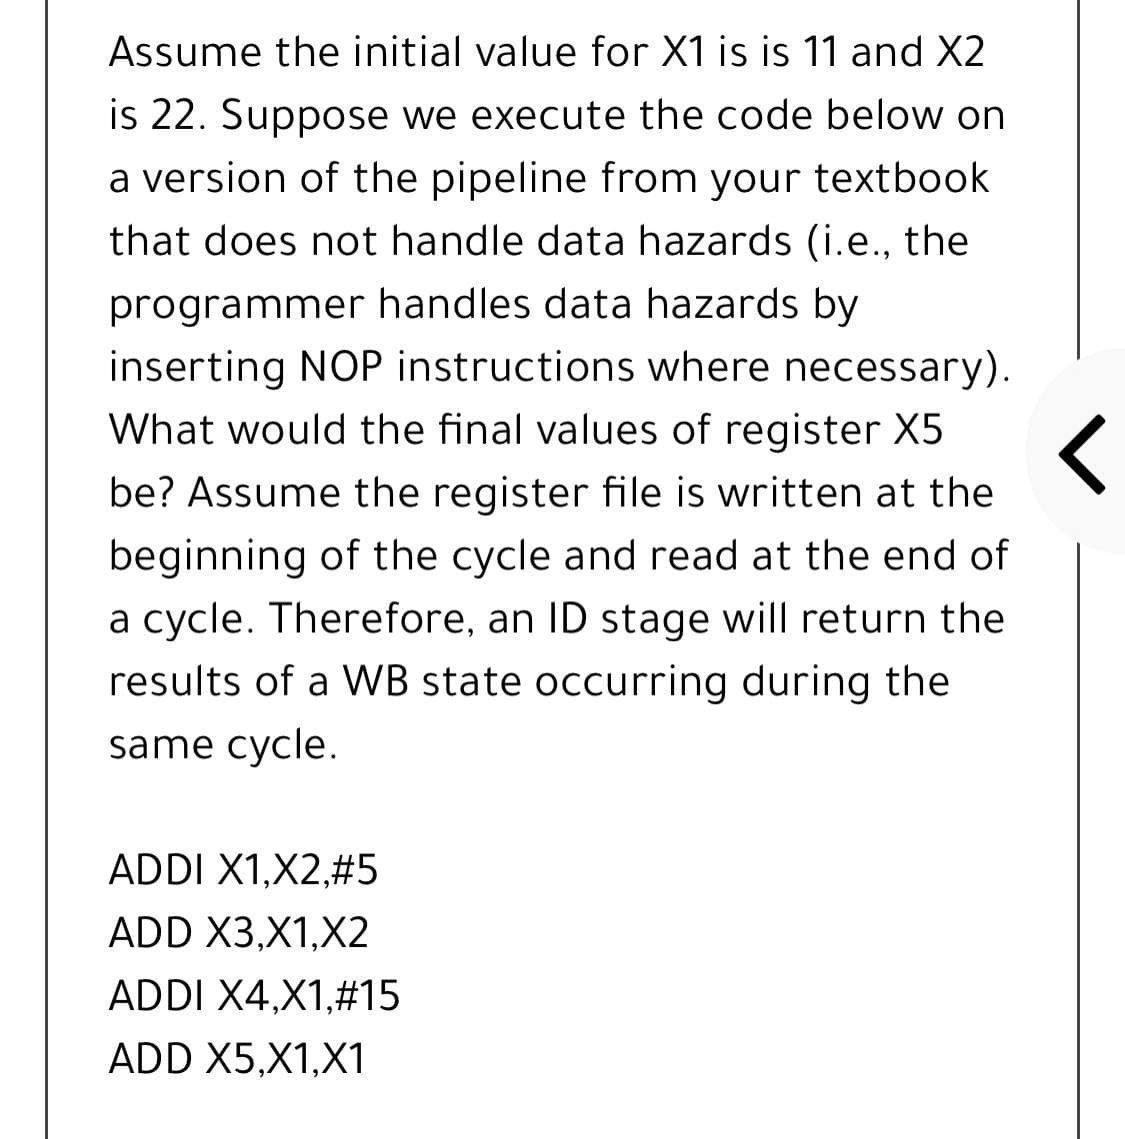 Assume the initial value for X1 is is 11 and X2
is 22. Suppose we execute the code below on
a version of the pipeline from your textbook
that does not handle data hazards (i.e., the
programmer handles data hazards by
inserting NOP instructions where necessary).
What would the final values of register X5
be? Assume the register file is written at the
beginning of the cycle and read at the end of
a cycle. Therefore, an ID stage will return the
results of a WB state occurring during the
same cycle.
ADDI X1,X2,#5
ADD X3,X1,X2
ADDI X4,X1,#15
ADD X5,X1,X1
